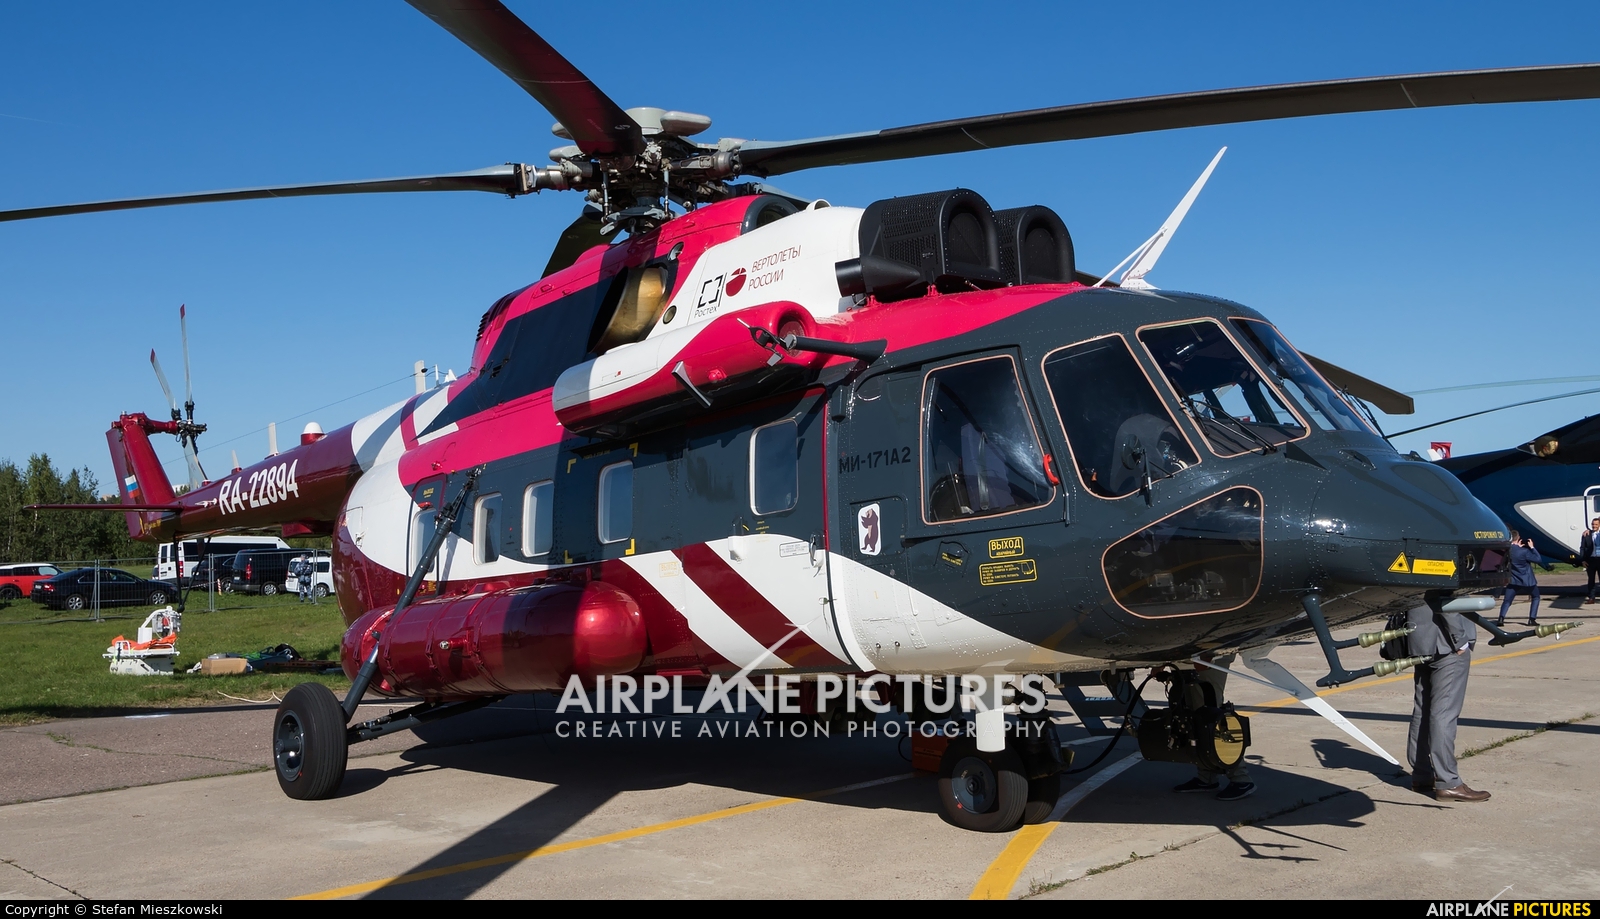 Russian Helicopters RA-22894 aircraft at Zhukovsky International Airport